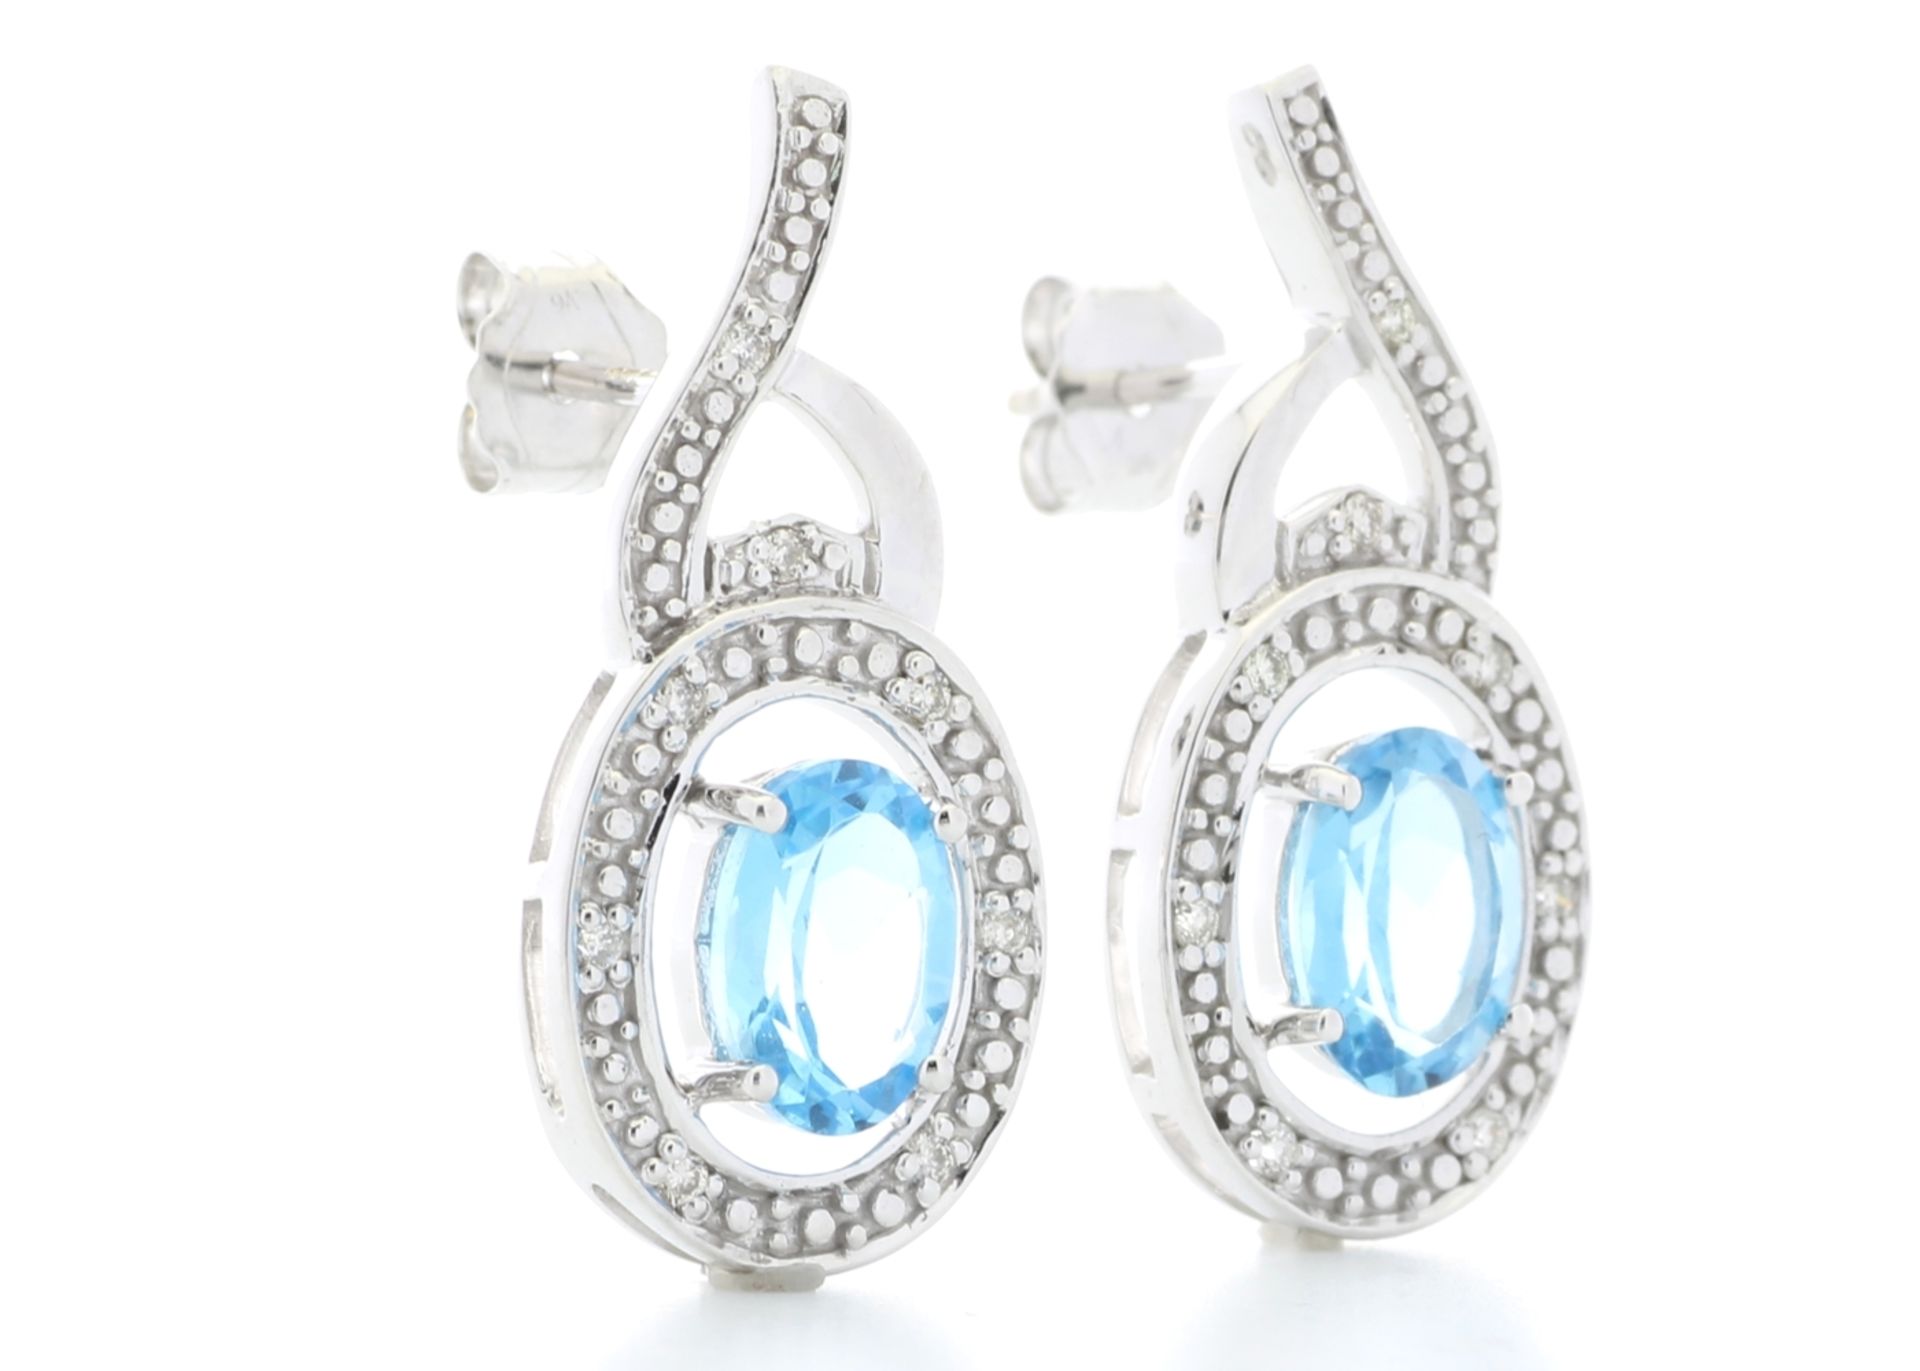 UNUSED - Certified by GIE 9ct White Gold Diamond And Blue Topaz Earring 0.05 Carats, Colour-D, - Image 4 of 4